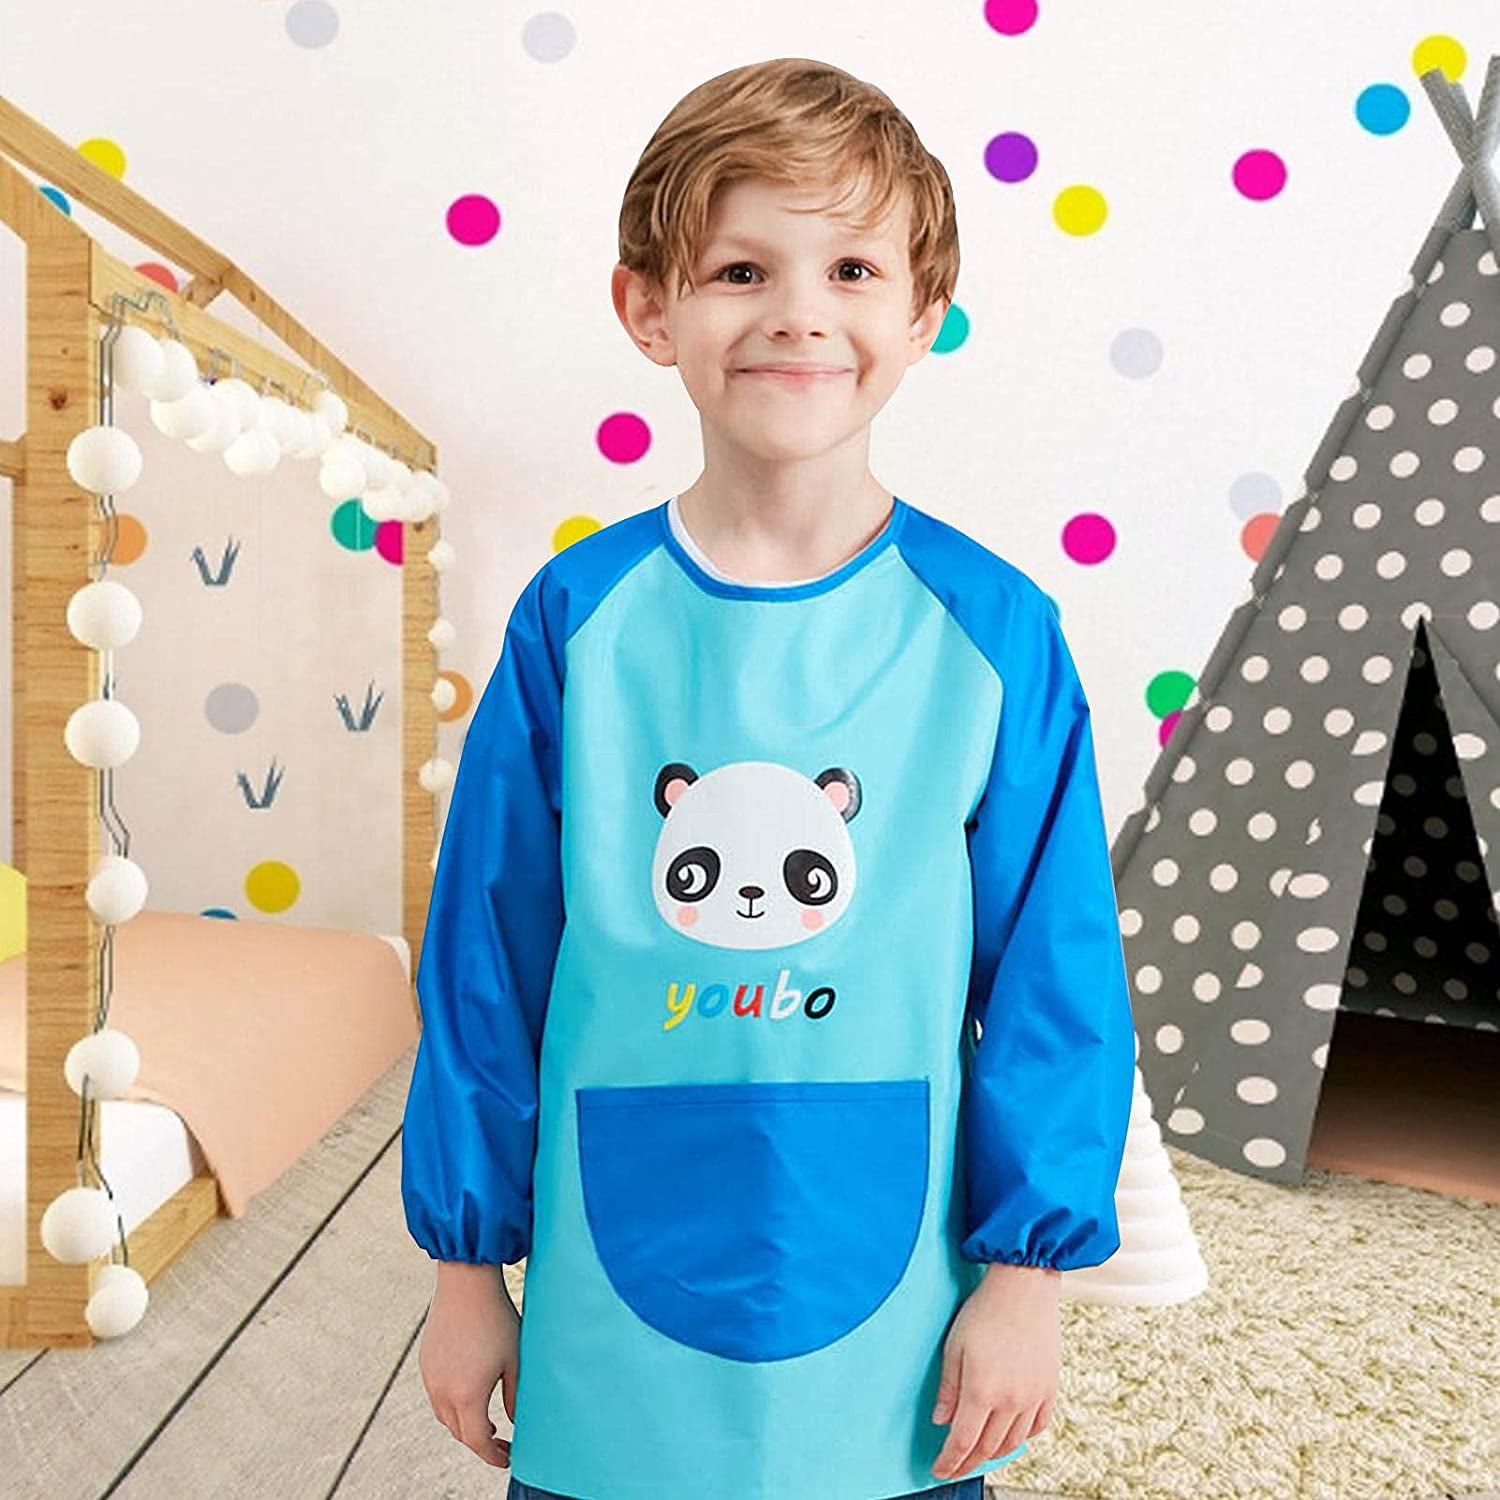 Children's Painting Art Apron Craft Drawing Coat Apron with Cartoon Pattern Children Painting Smock with Long Sleeves and Big Pockets for 7-11 Years Girls&Boy Kids Waterproof Art Smock 